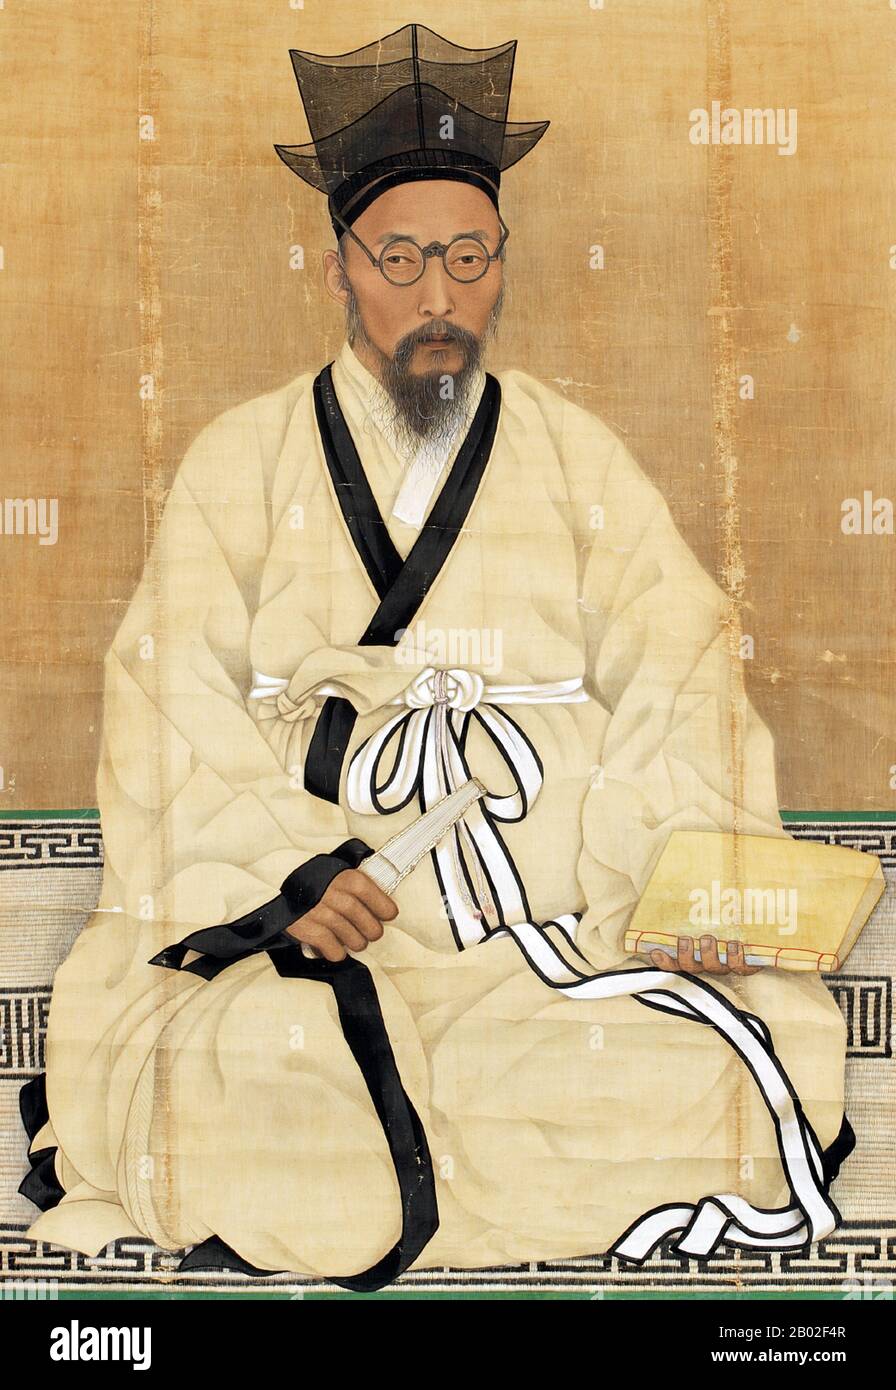 This is a portrait of Hwang Hyeon (1855-1910), a scholar and patriot toward the end of the Joseon period, produced by Chae Yong-sin (1850-1941).  Chae painted the portrait in May 1911, a year after Hwang's death, based on the photograph but changing the costume and pose. Hwang is portrayed wearing a Confucian scholar's overcoat (simeui) and a tiered black horsehair hat, sitting on a decorative mat and holding a book and a fan in his hands. Stock Photo